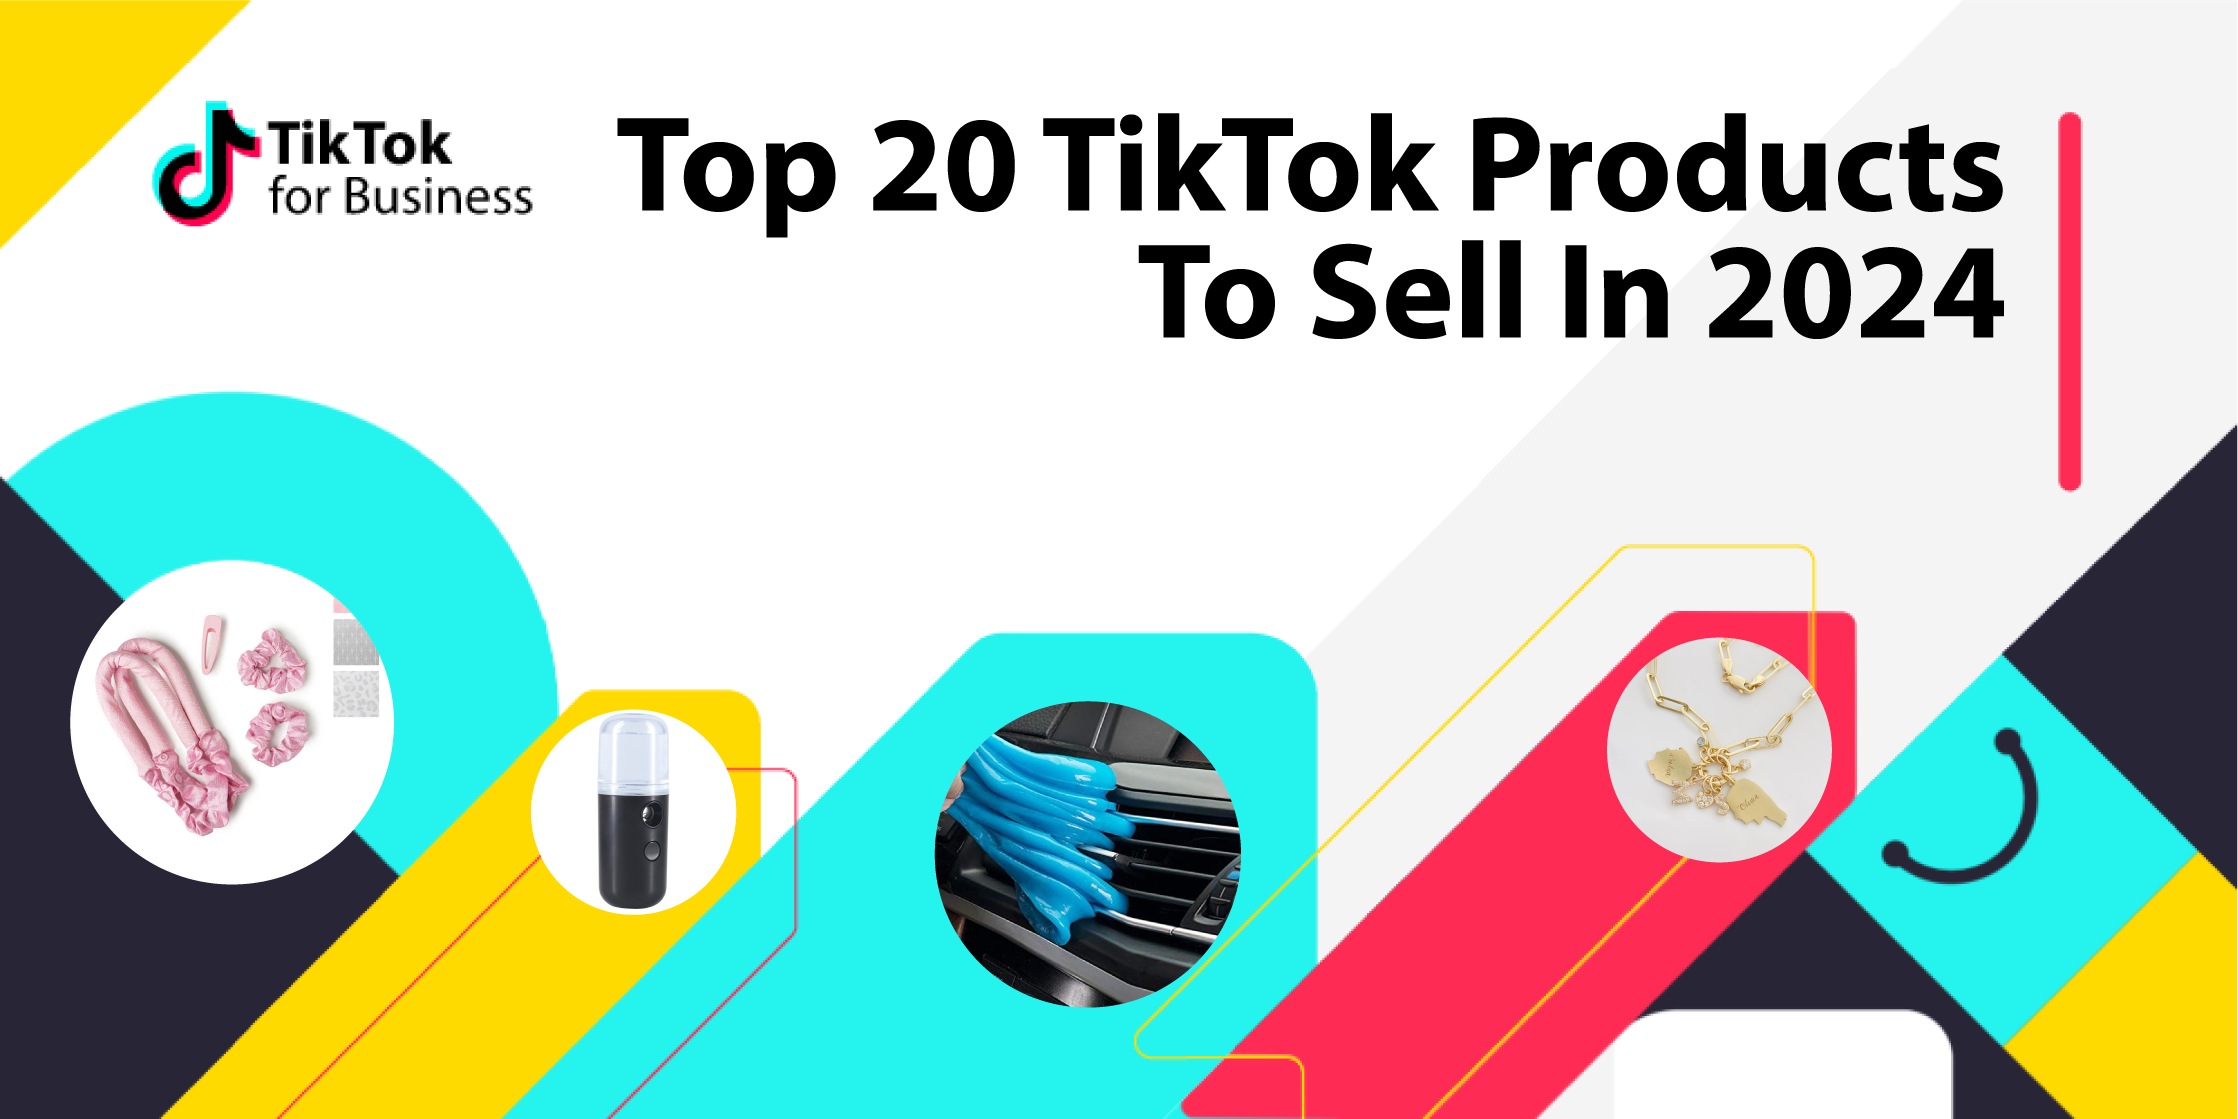 TOP 20 TikTok Products To Sell in 2024